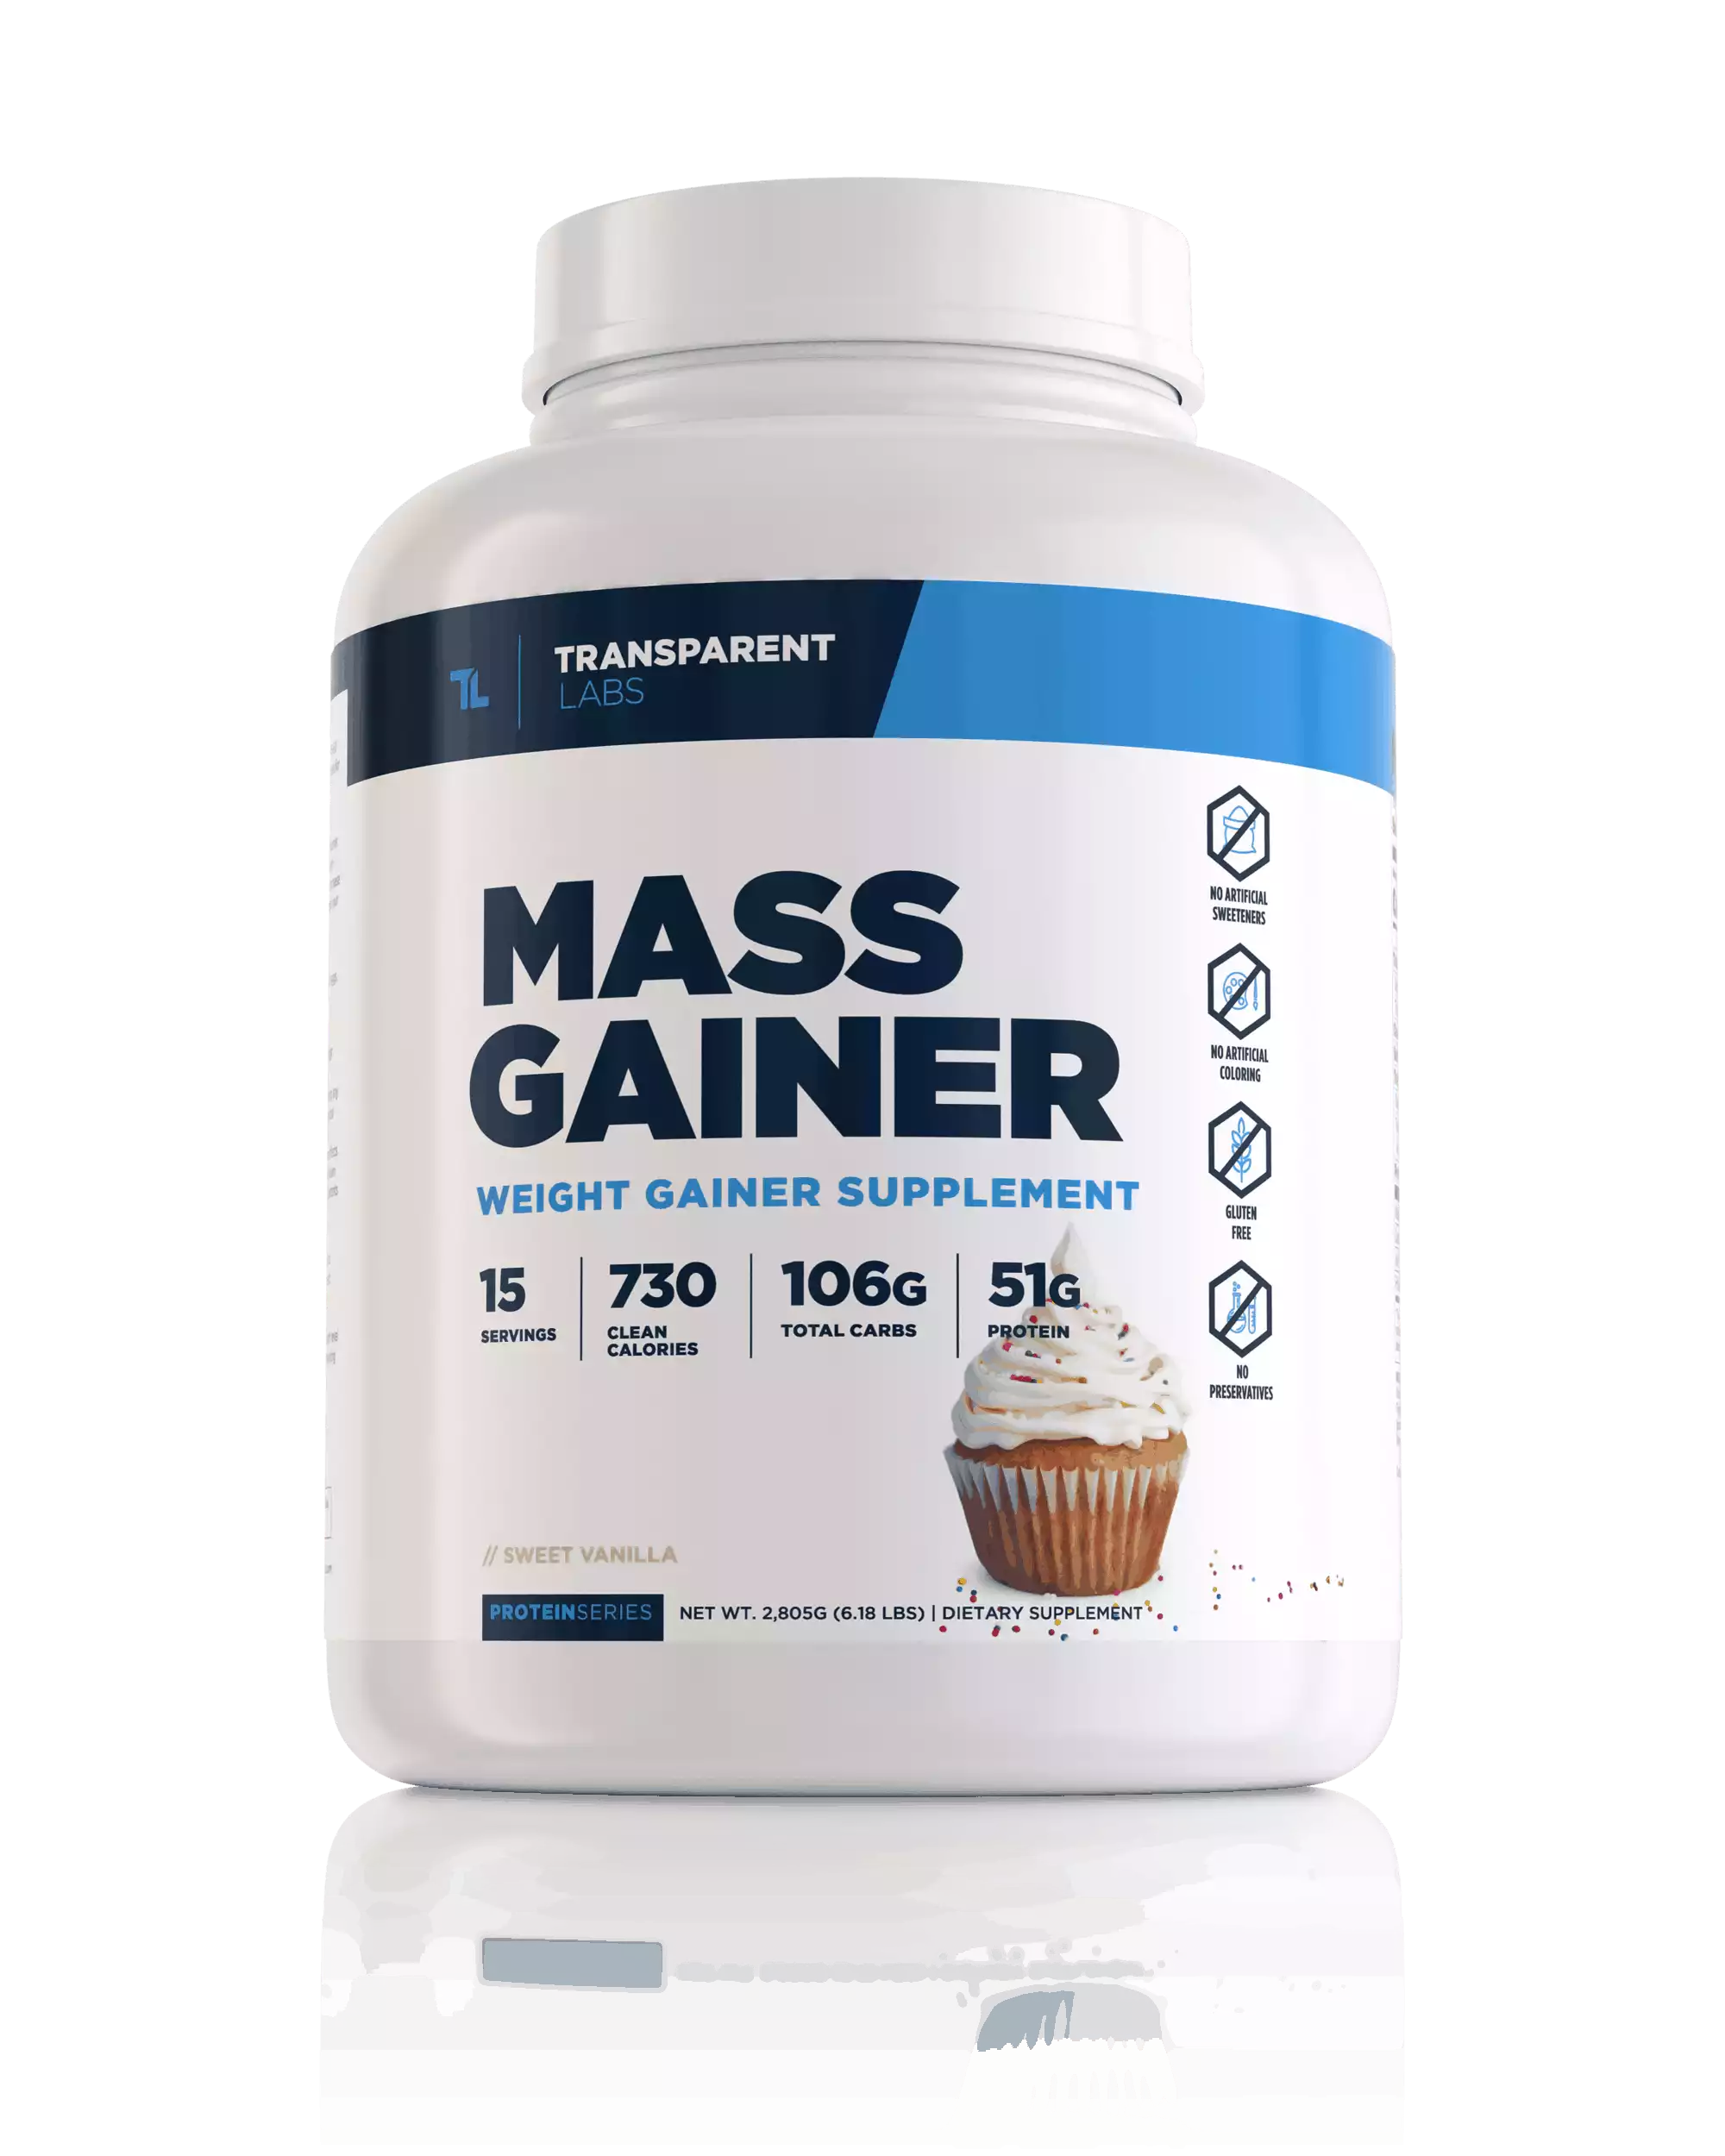 Transparent Labs MASS GAINER with Grass-Fed Whey